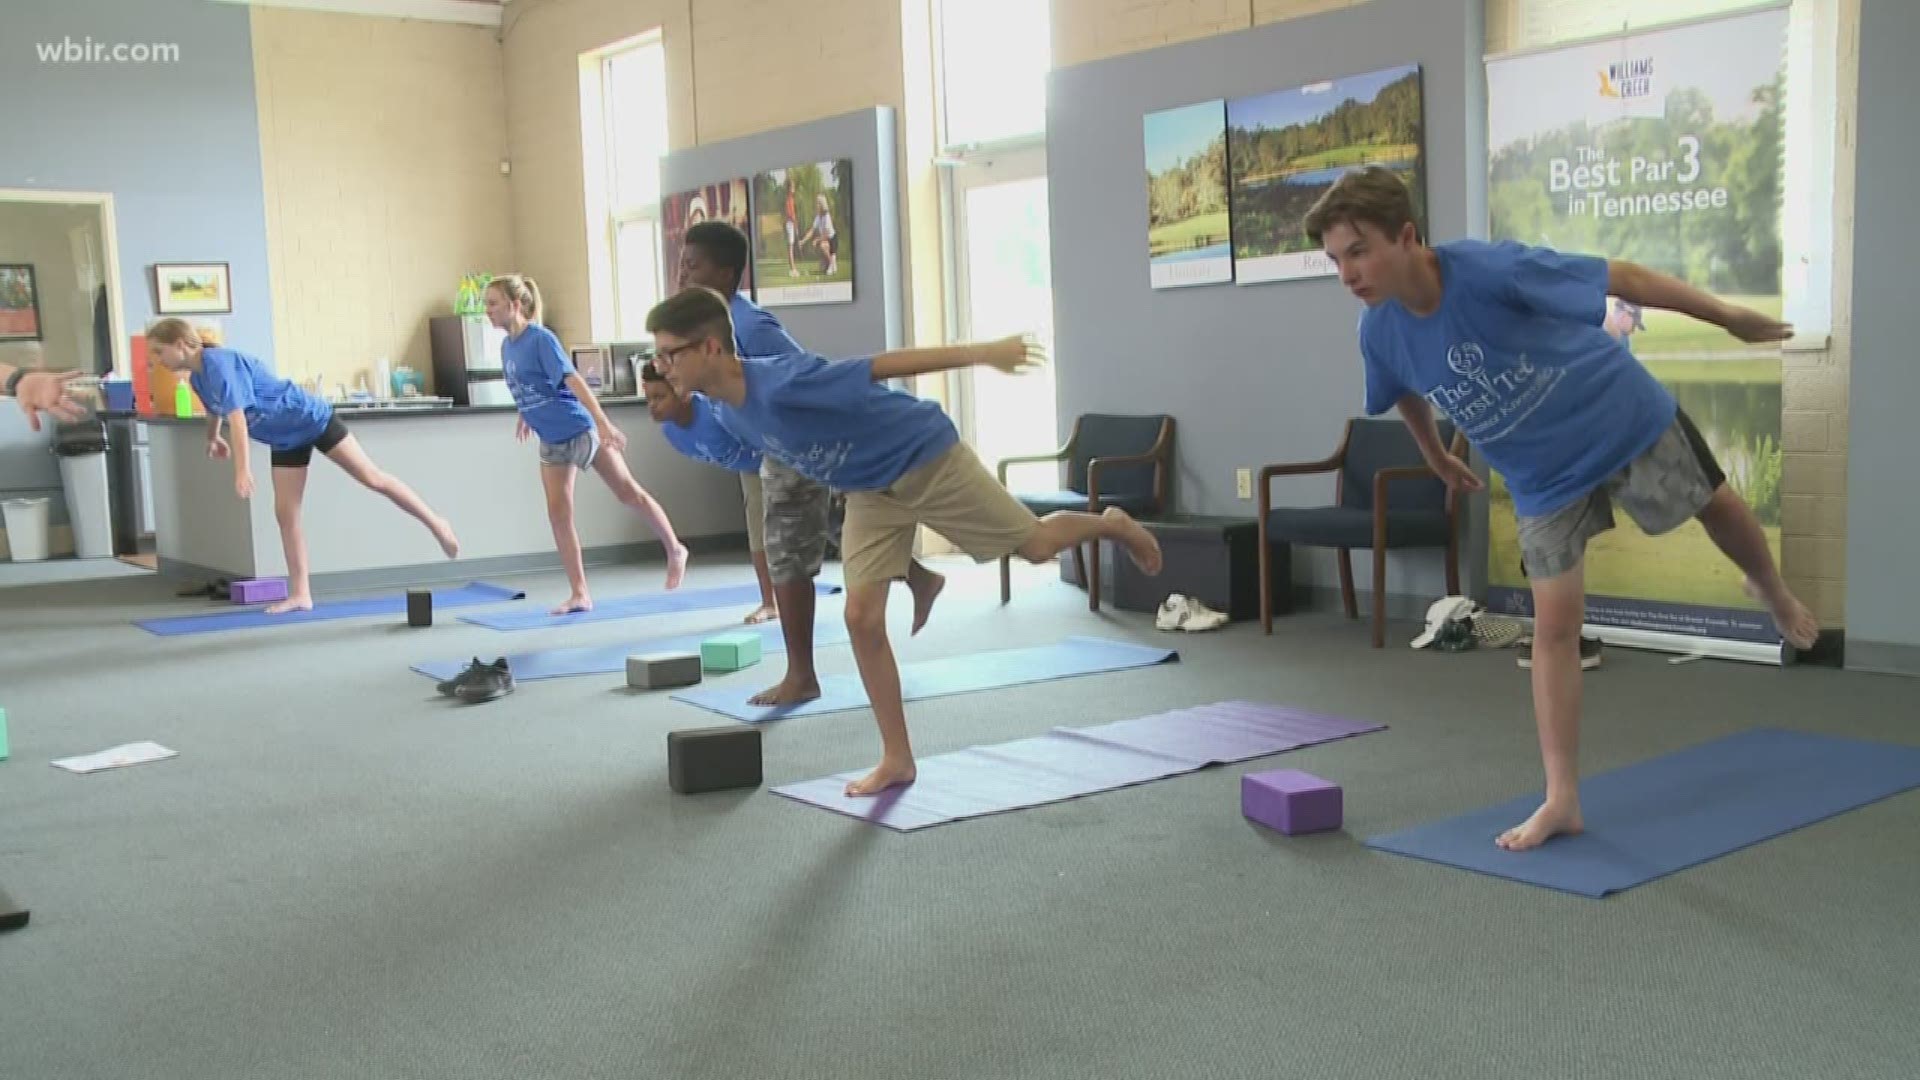 Special type of yoga targets golfers' bodies and minds